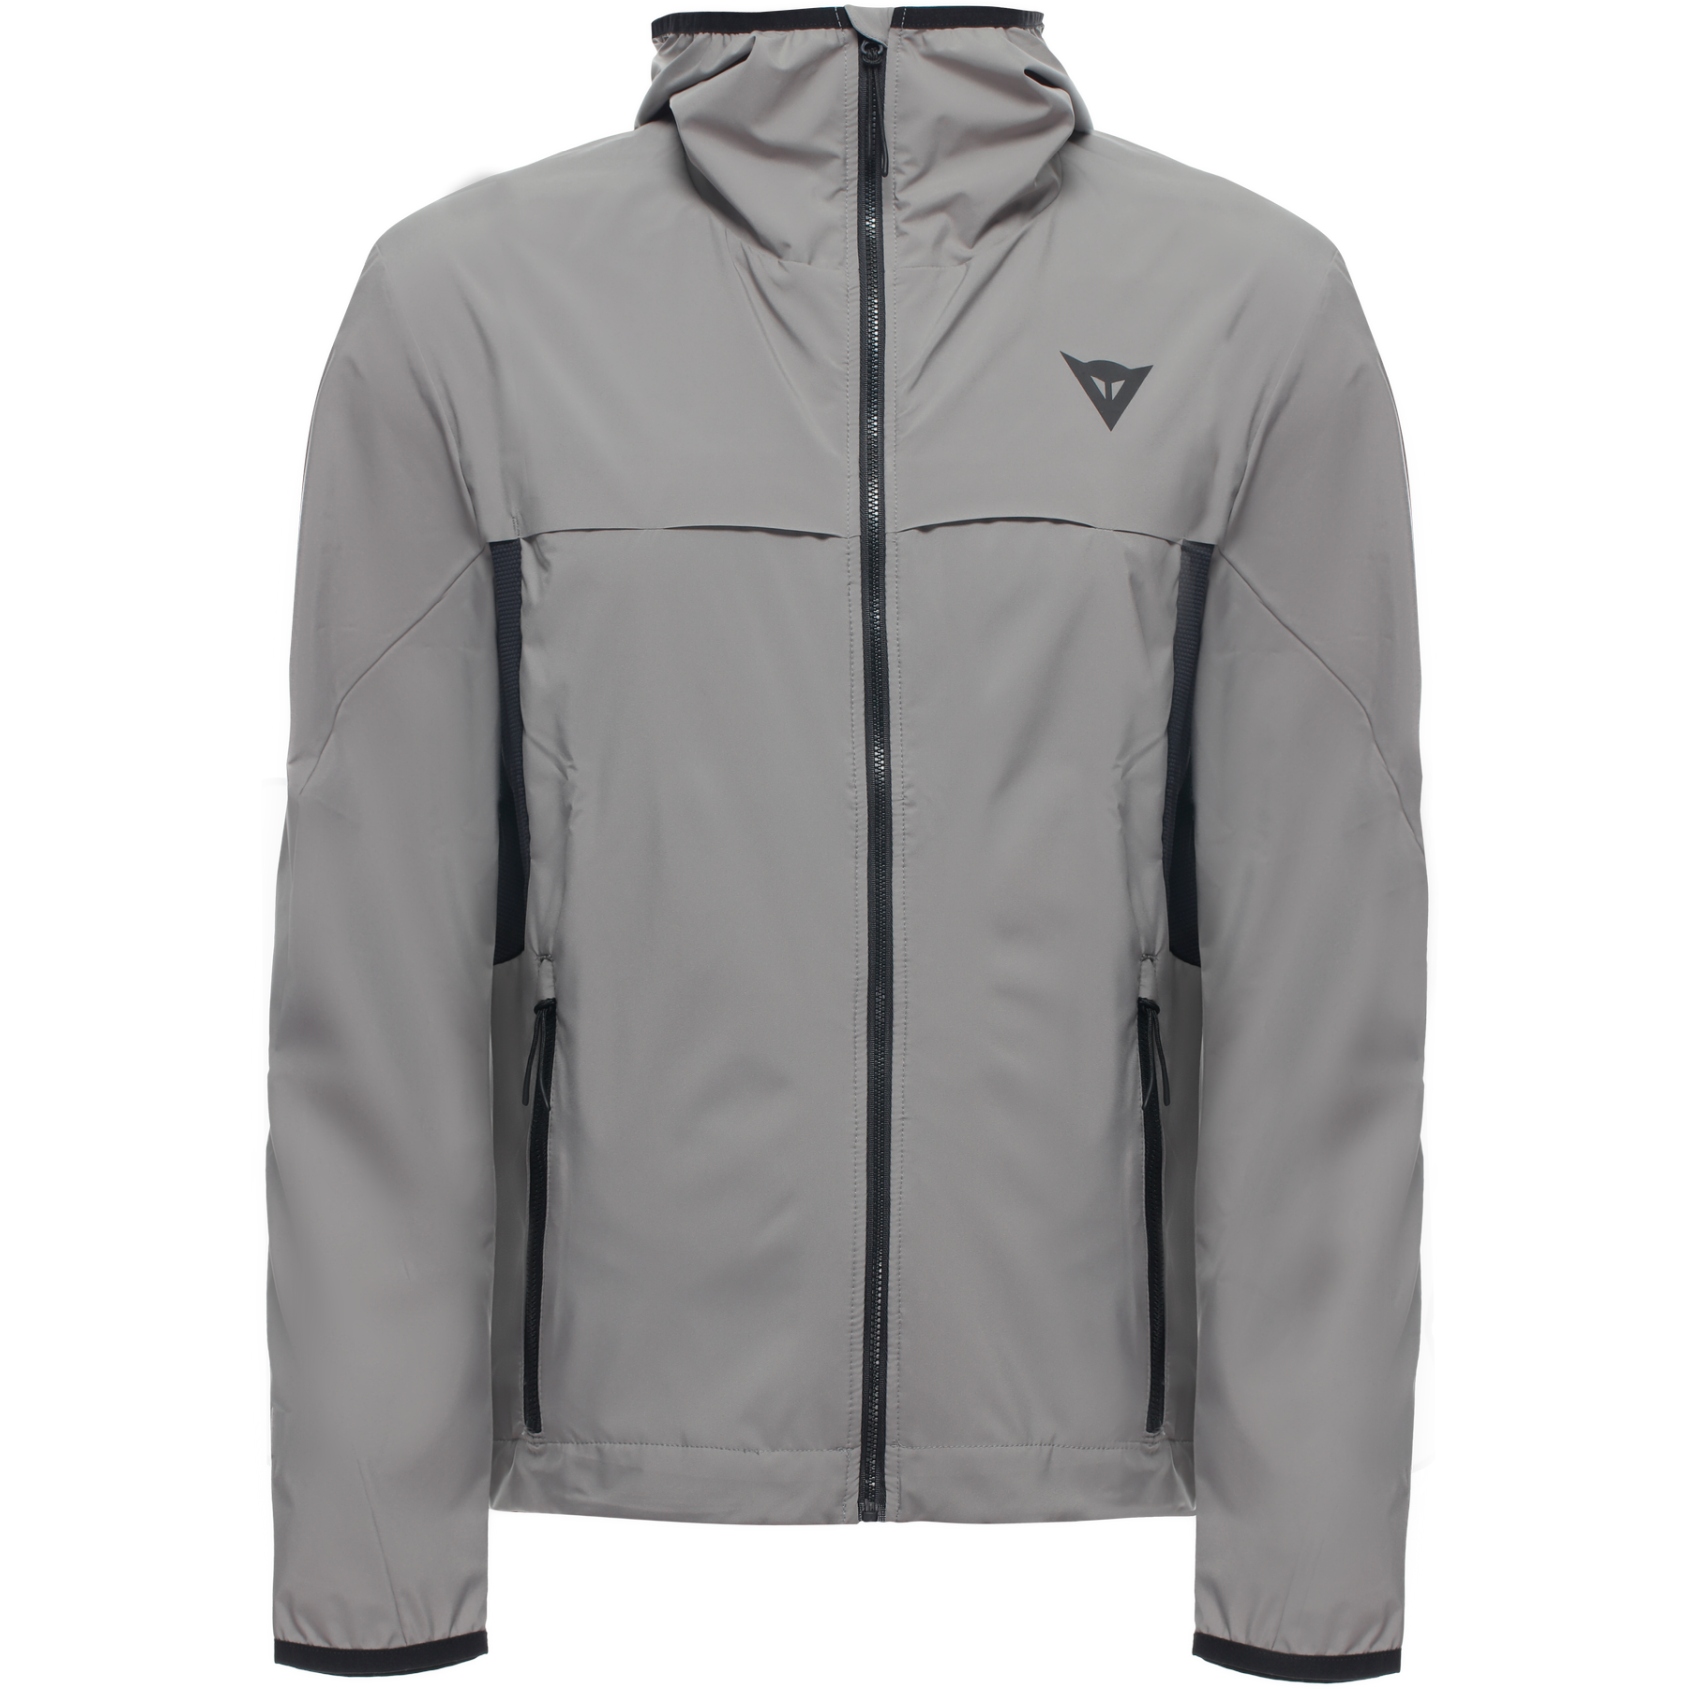 Picture of Dainese HGC Hybrid Jacket - gray